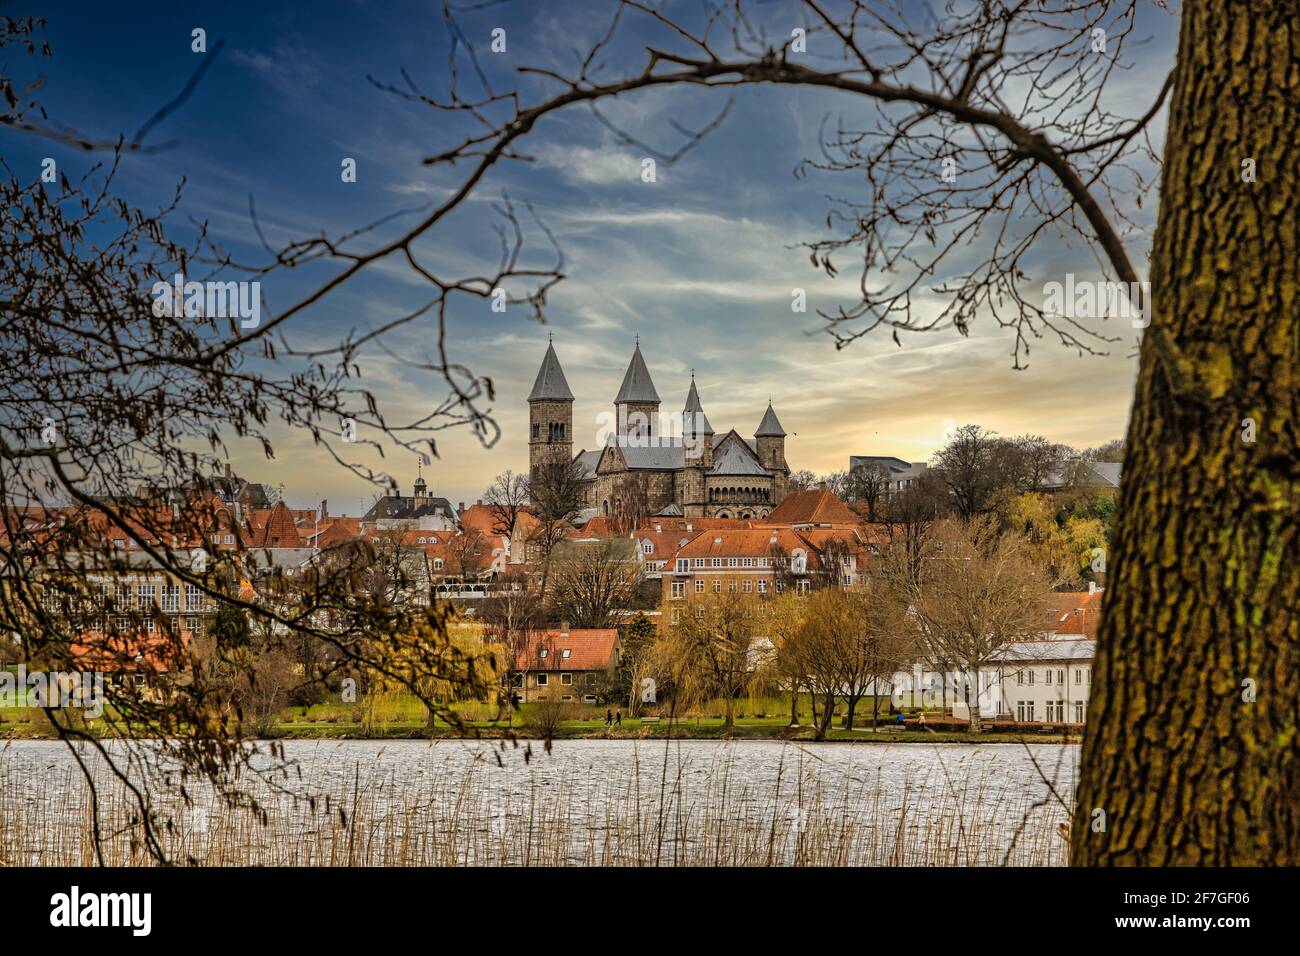 Viborg ancient cathedral in the middle of Denmark Stock Photo